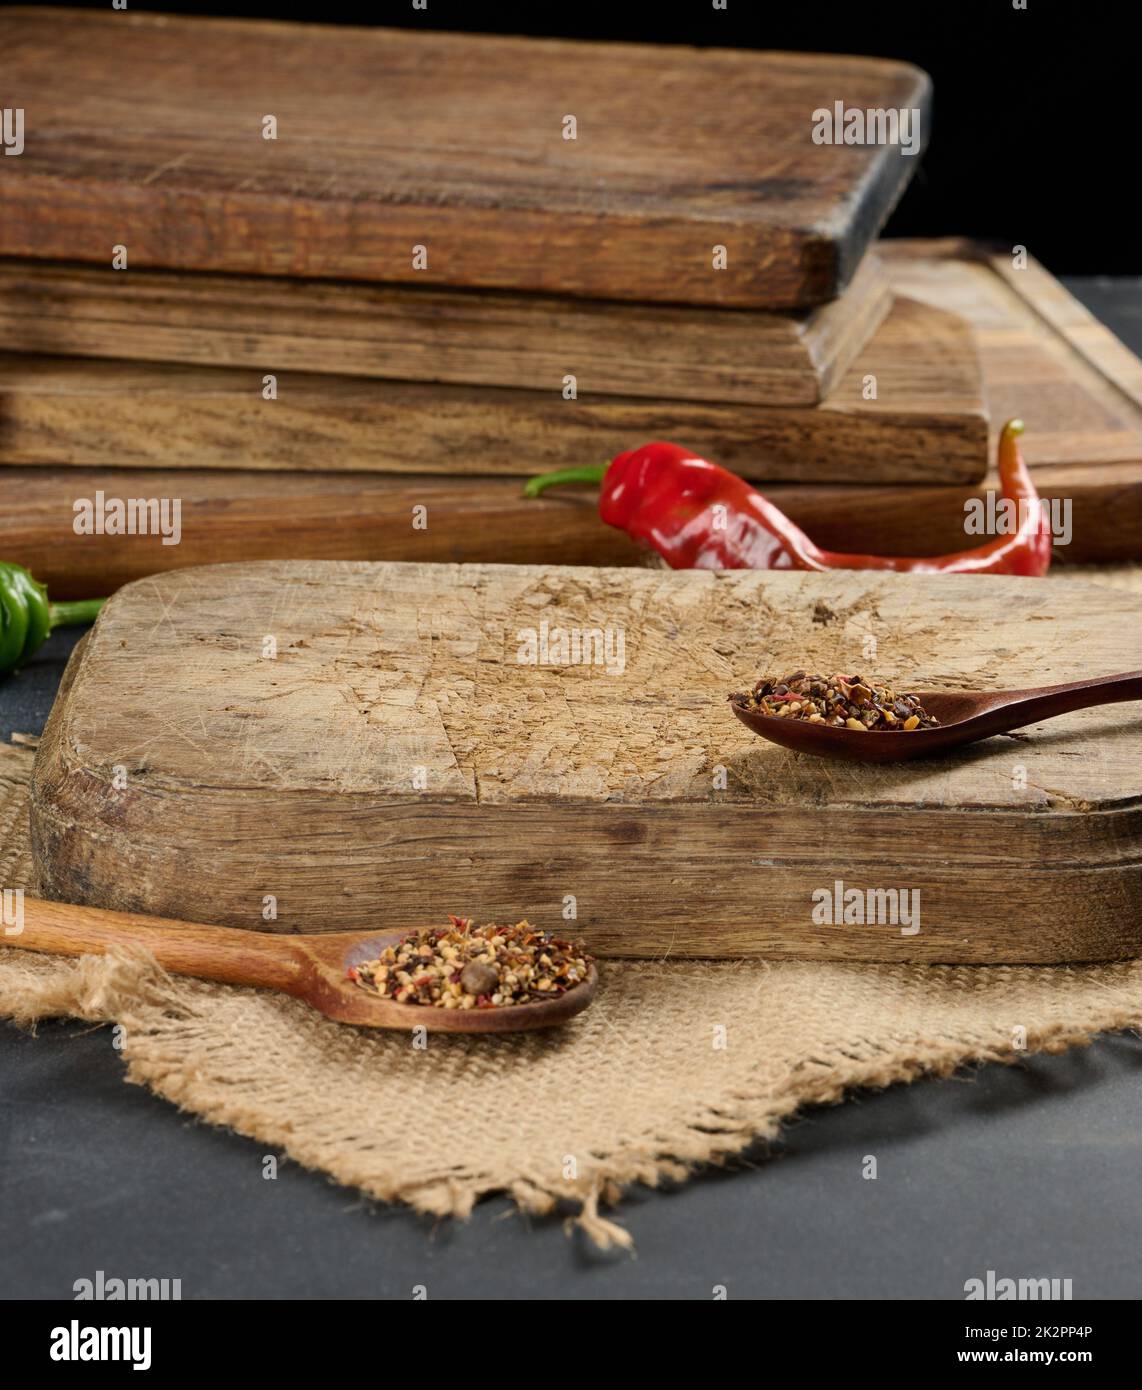 empty kitchen brown wooden cutting board on black table, next to spoons with spice and fresh chili, black background Stock Photo